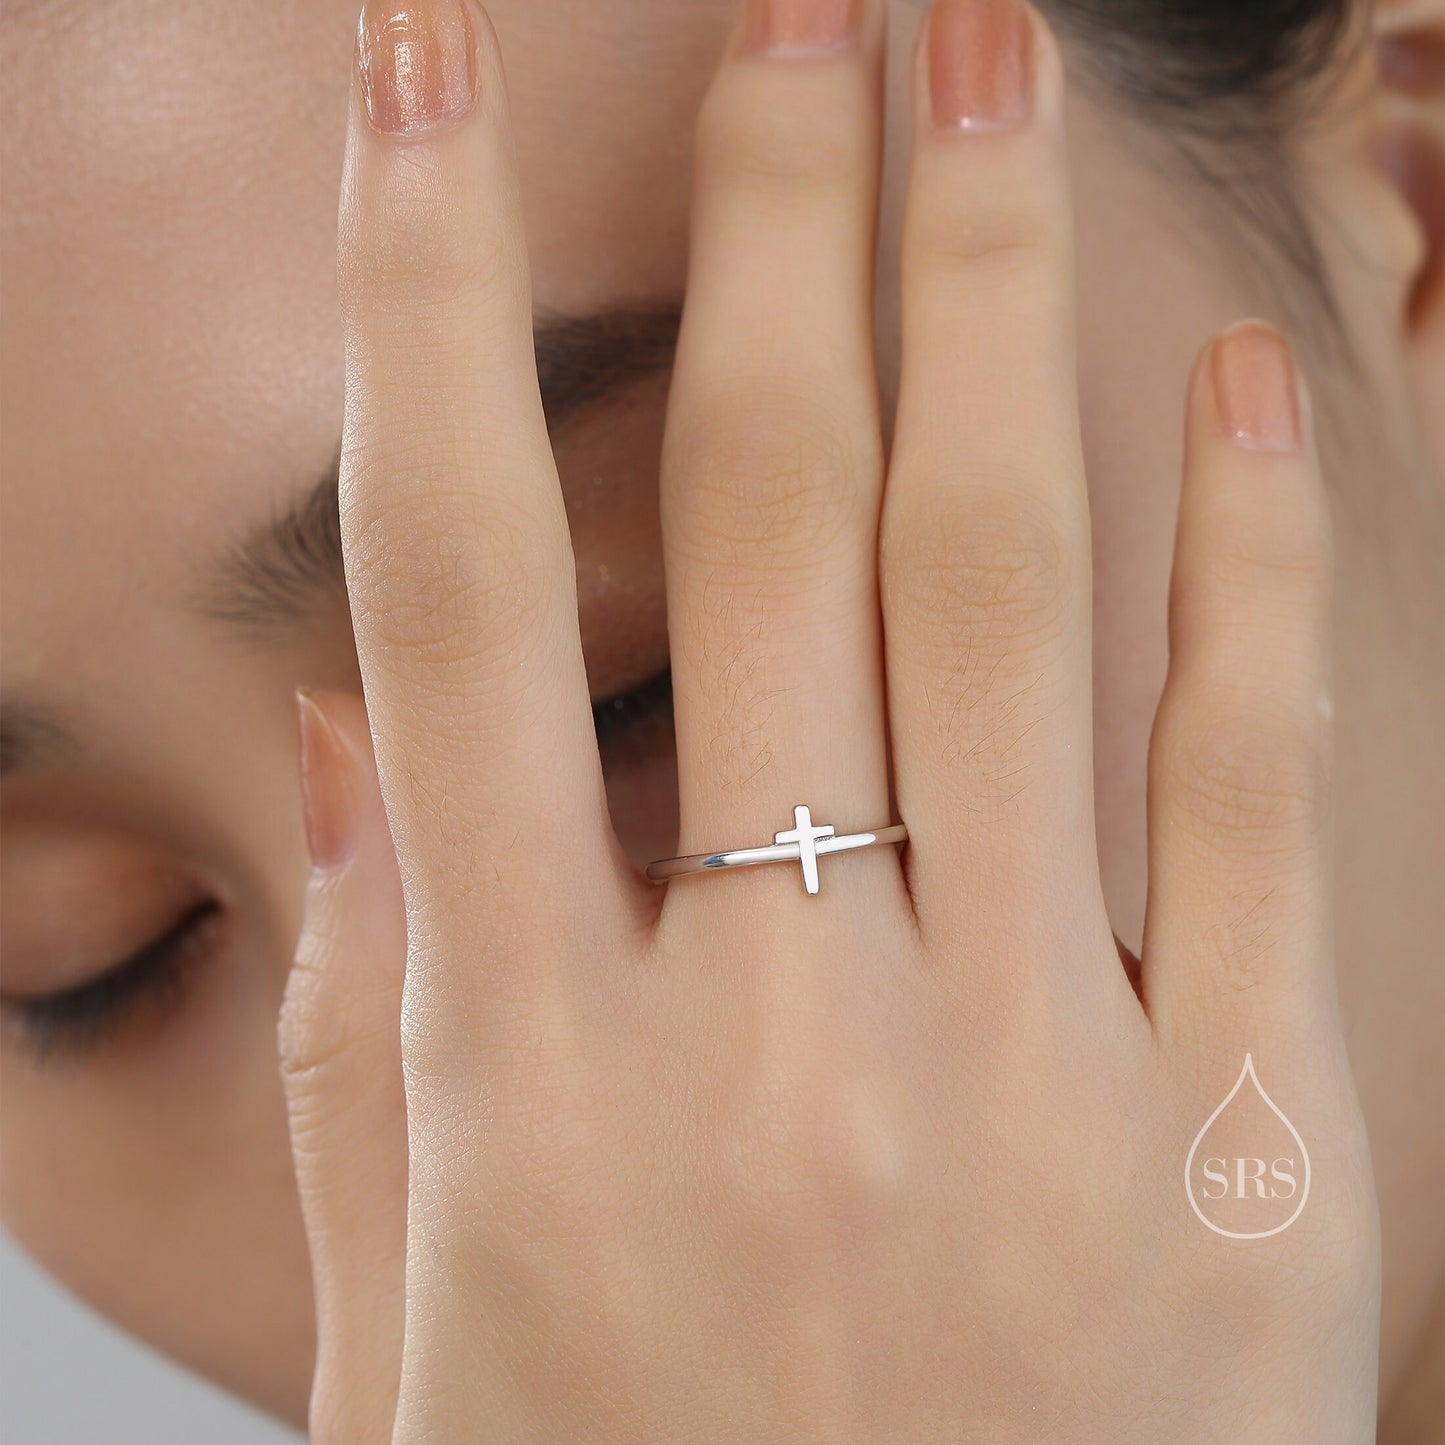 Extra Tiny Cross Ring in Sterling Silver, Silver Cross Ring in US 5 - 8? Extra Small Cross Ring